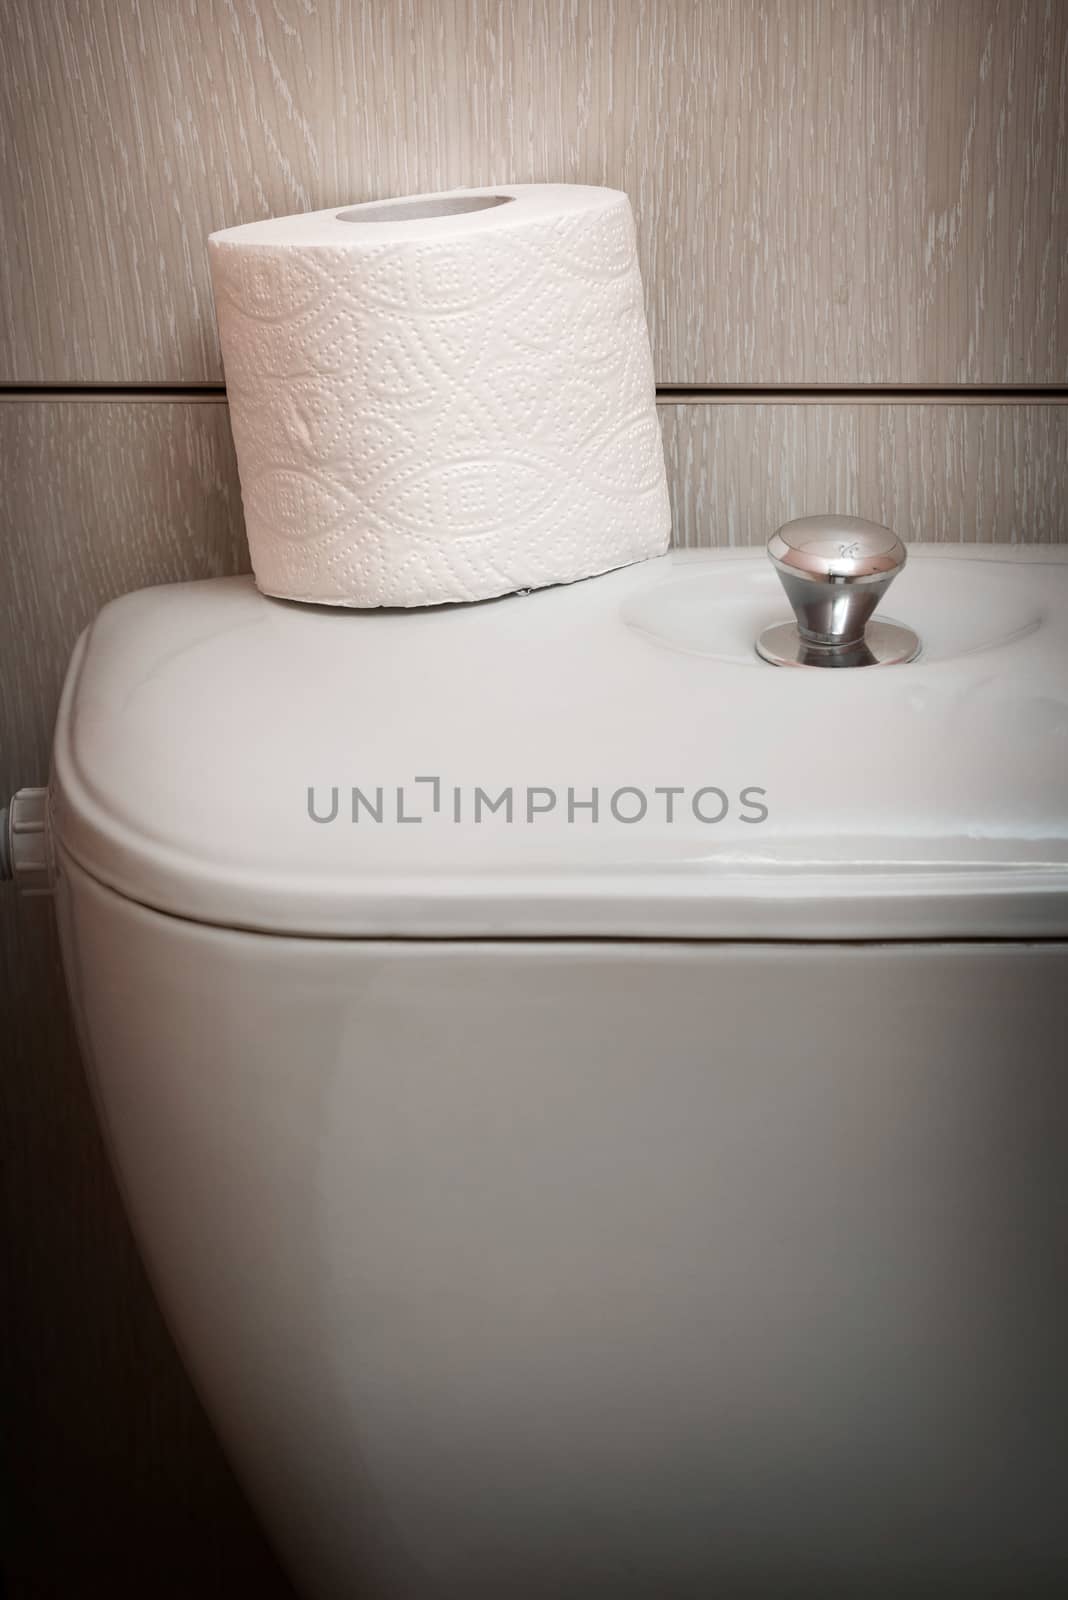 A soft white hygienic toilet paper roll is put on the flush, in the restroom